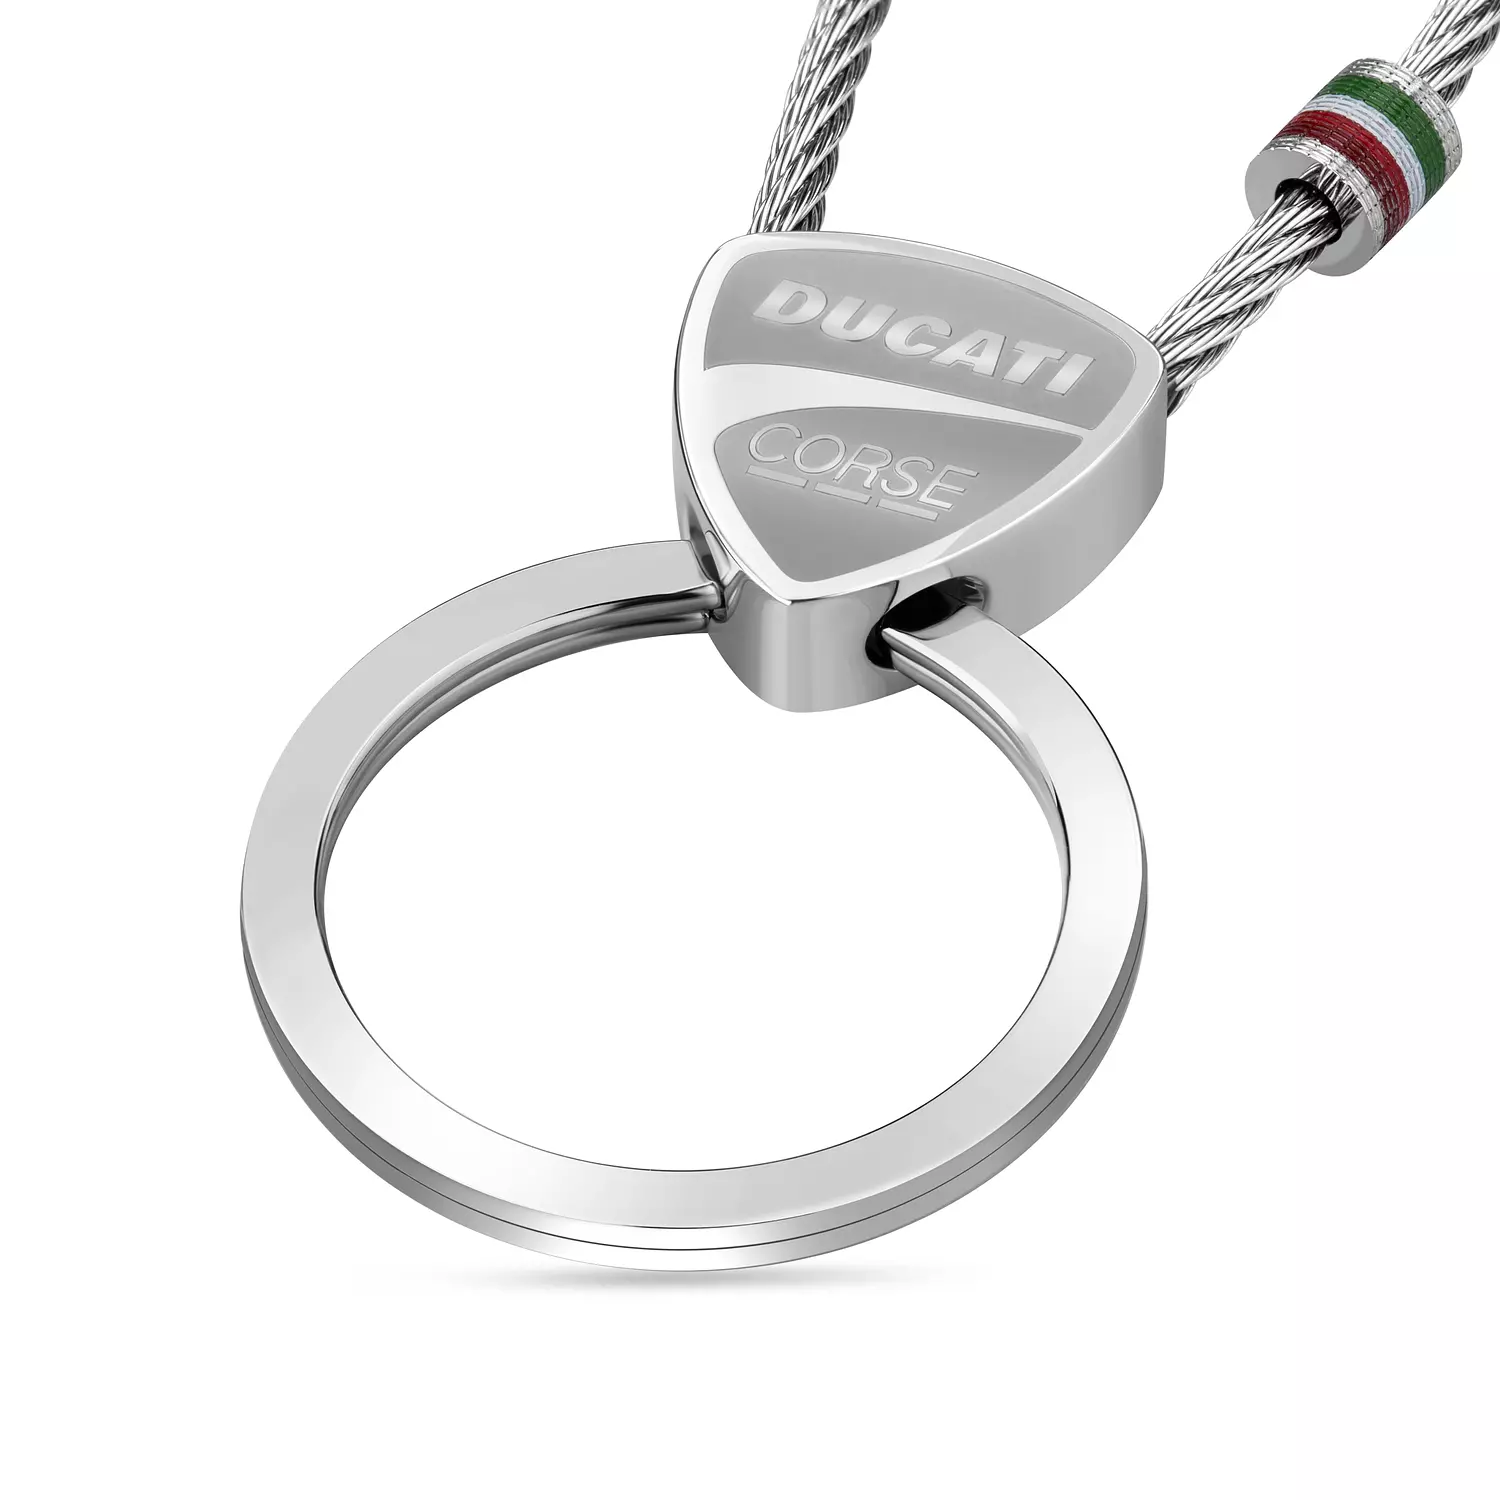 Ducati - DTAGK2137501 - SCUDETTO Stainless Steel KEYRING 1